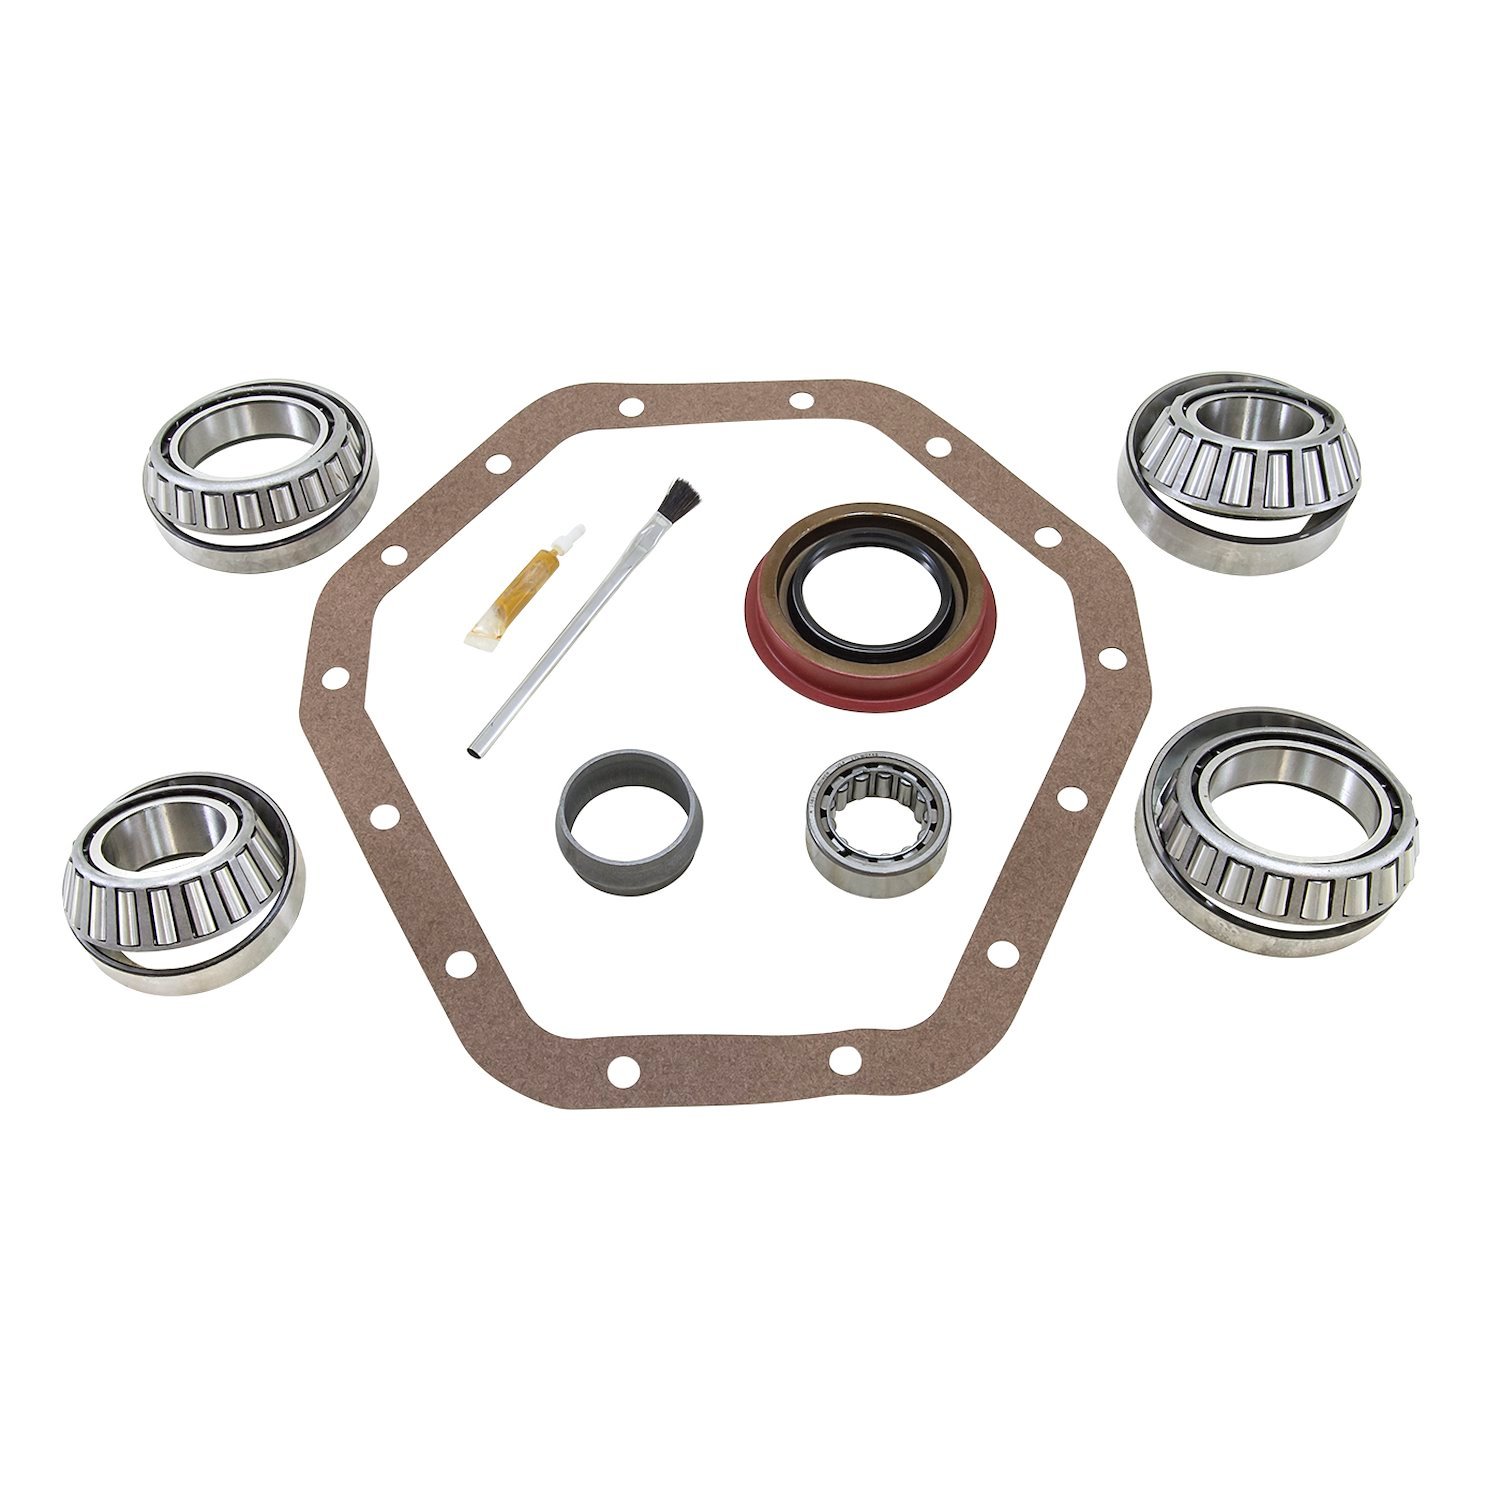 USA Standard ZBKGM14TC Bearing Kit, For '98 & Up 10.5 in. GM 14 Bolt Truck